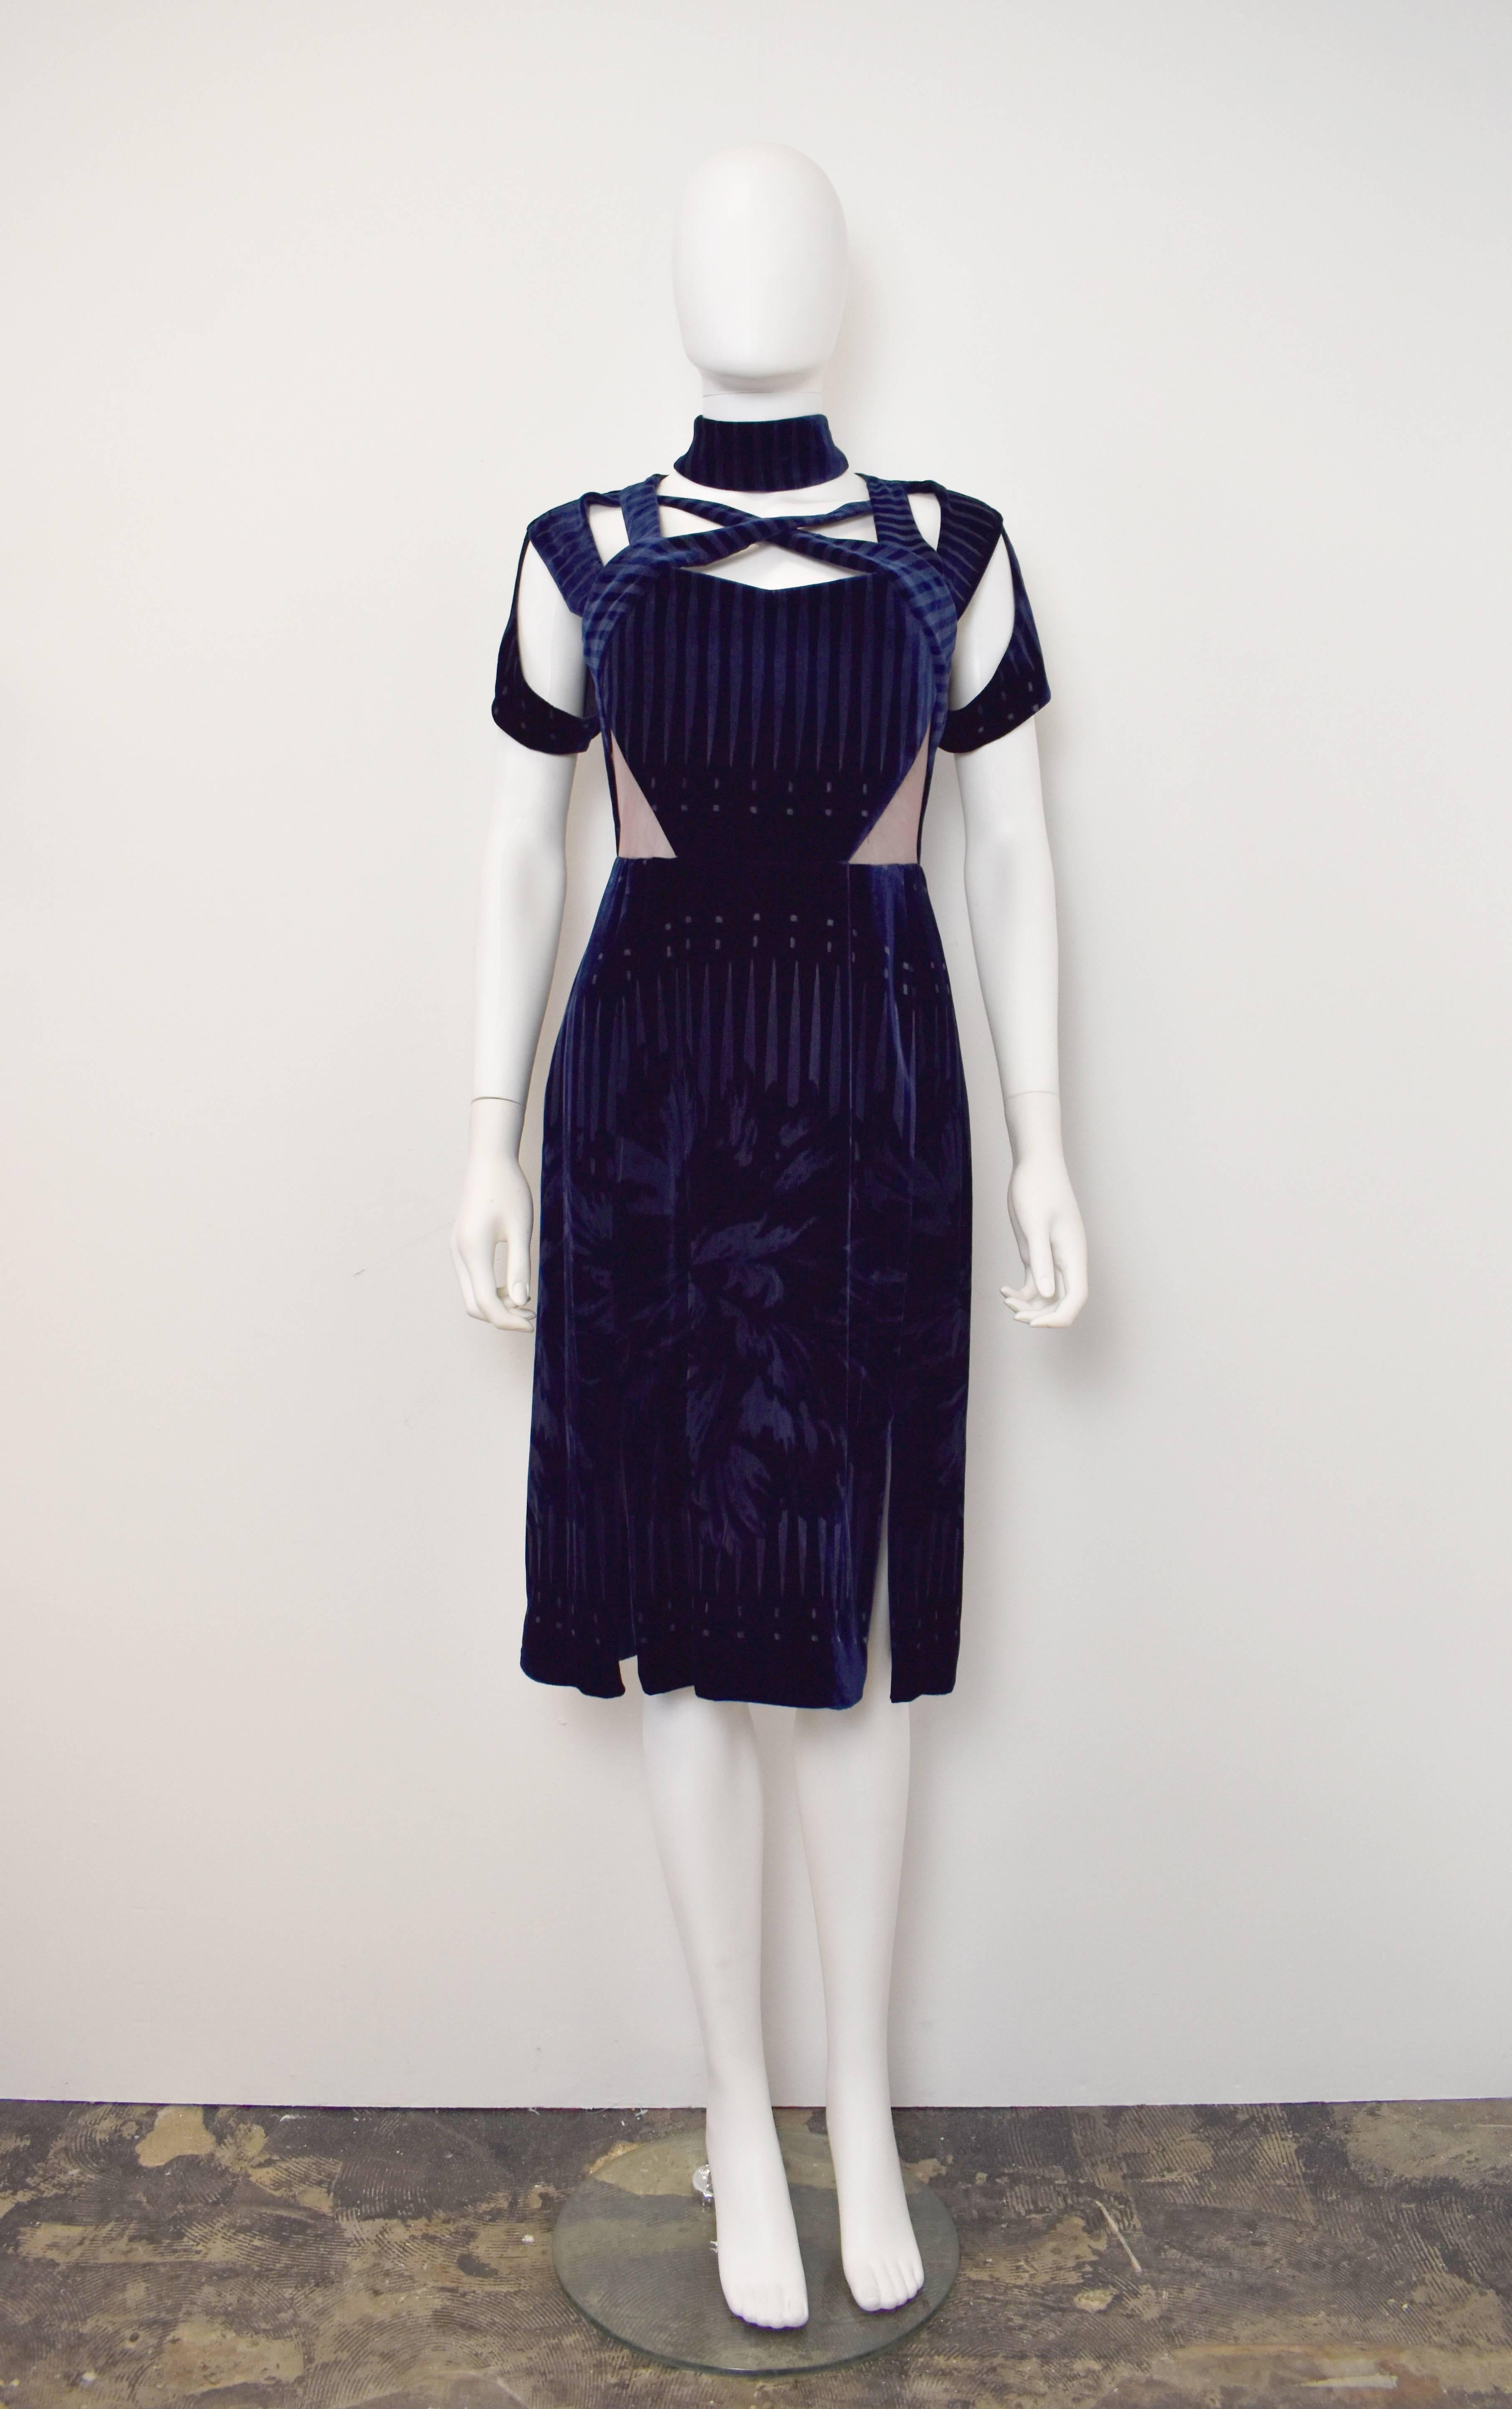 Peter Pilotto Royal velvet dress with sheer panels with detachable choker NWT 2